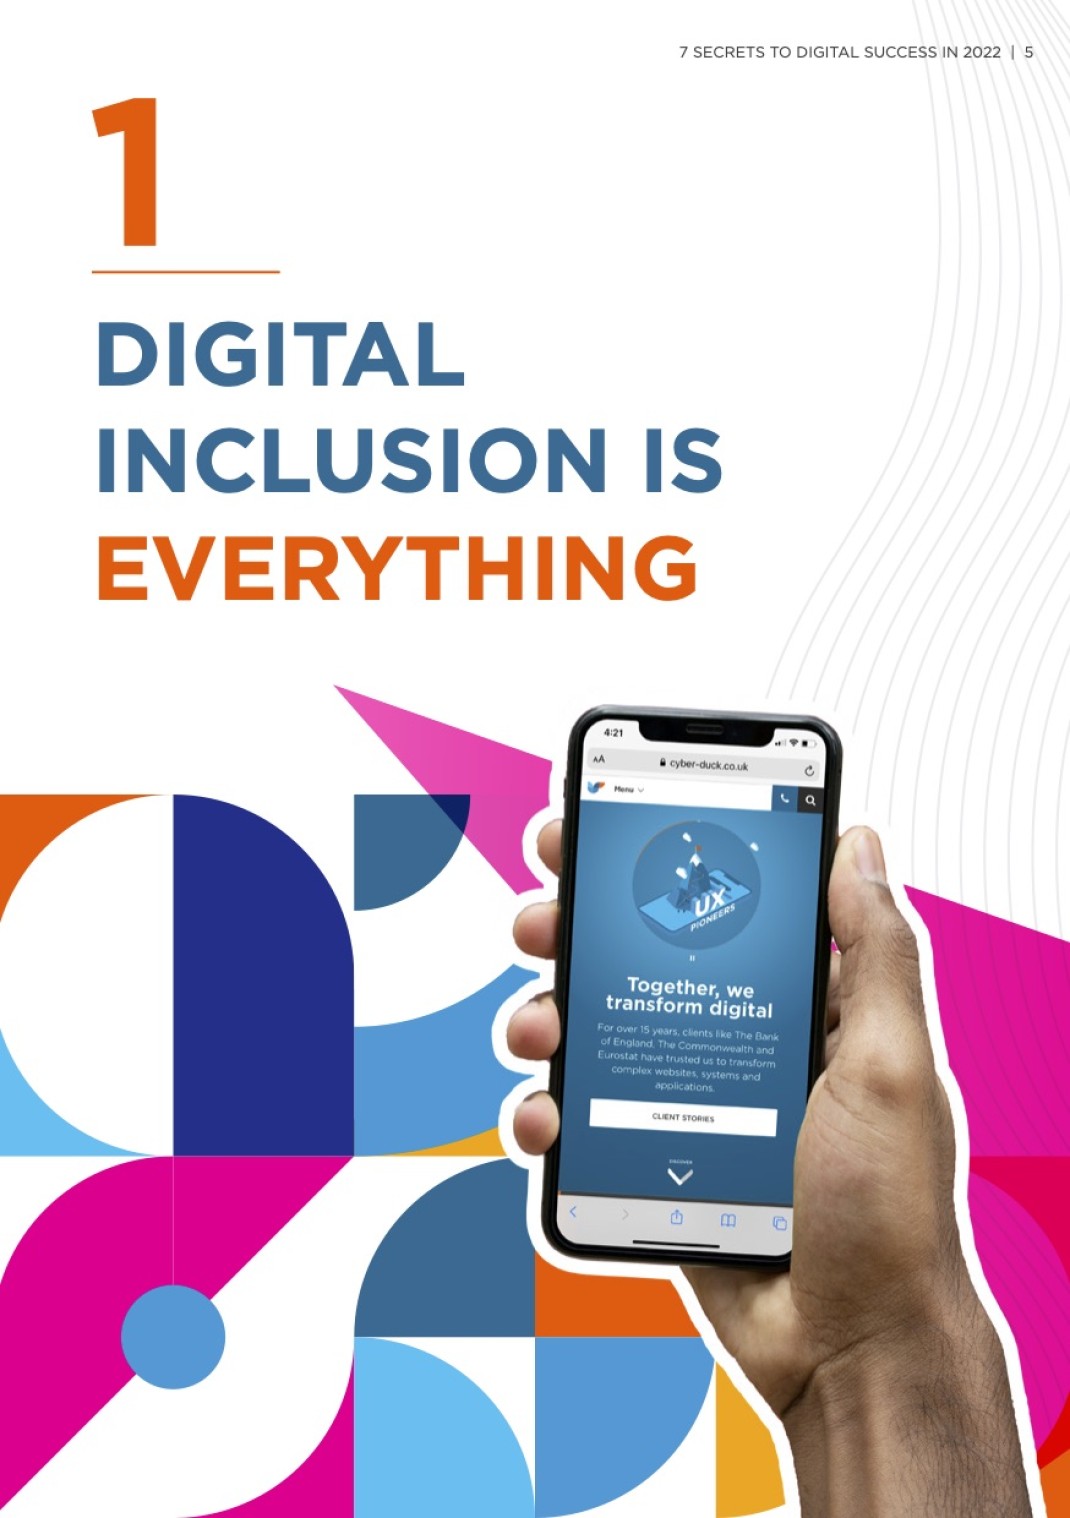 Inside Page from 7 Digital Secrets White Paper with Digital Inclusion is Everything Title